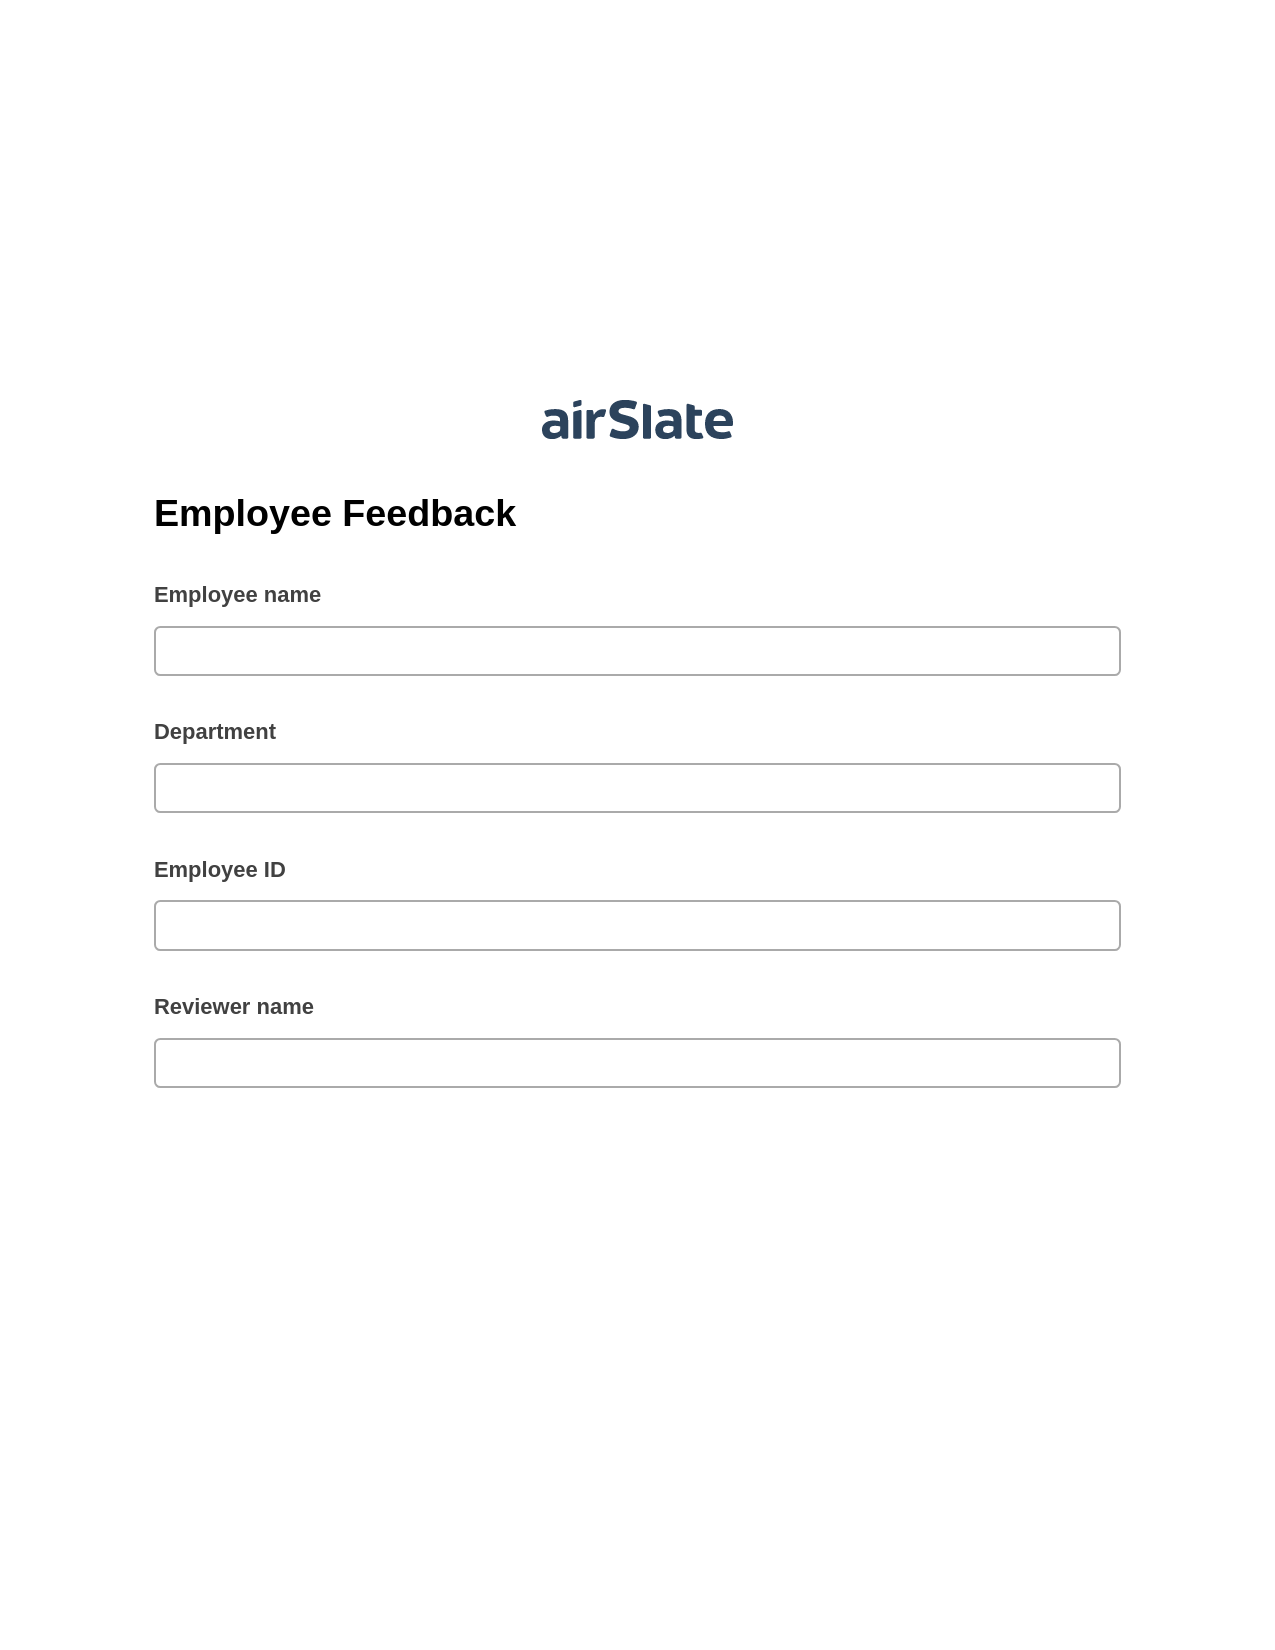 Employee Feedback Pre-fill from Google Sheet Dropdown Options Bot, Slack Notification Bot, Export to Excel 365 Bot